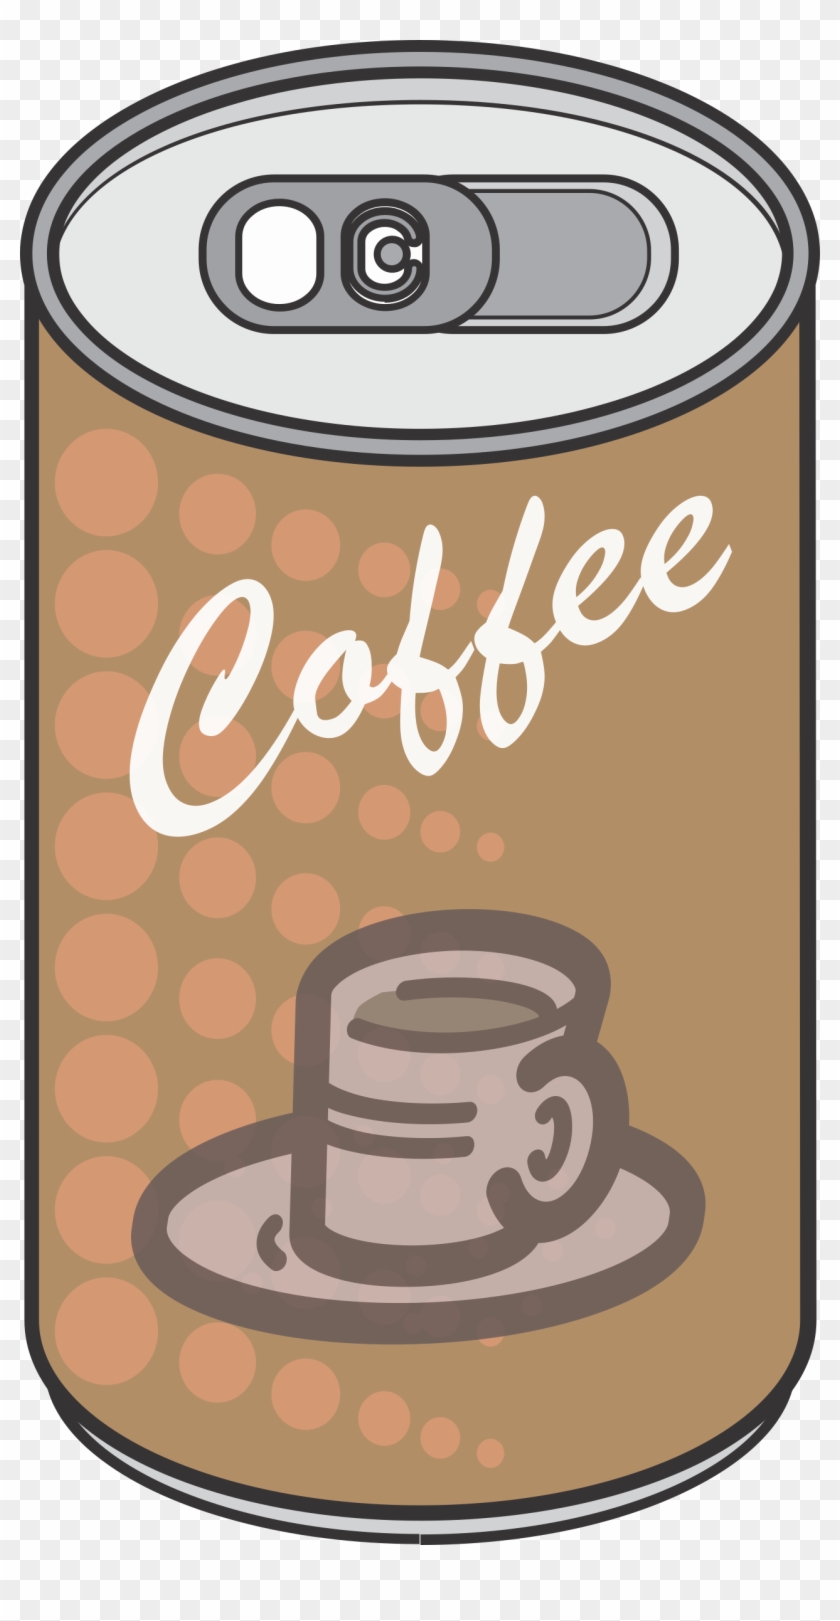 This Free Icons Png Design Of Canned Coffee - Can Juice Clip Art Transparent Png #2254628